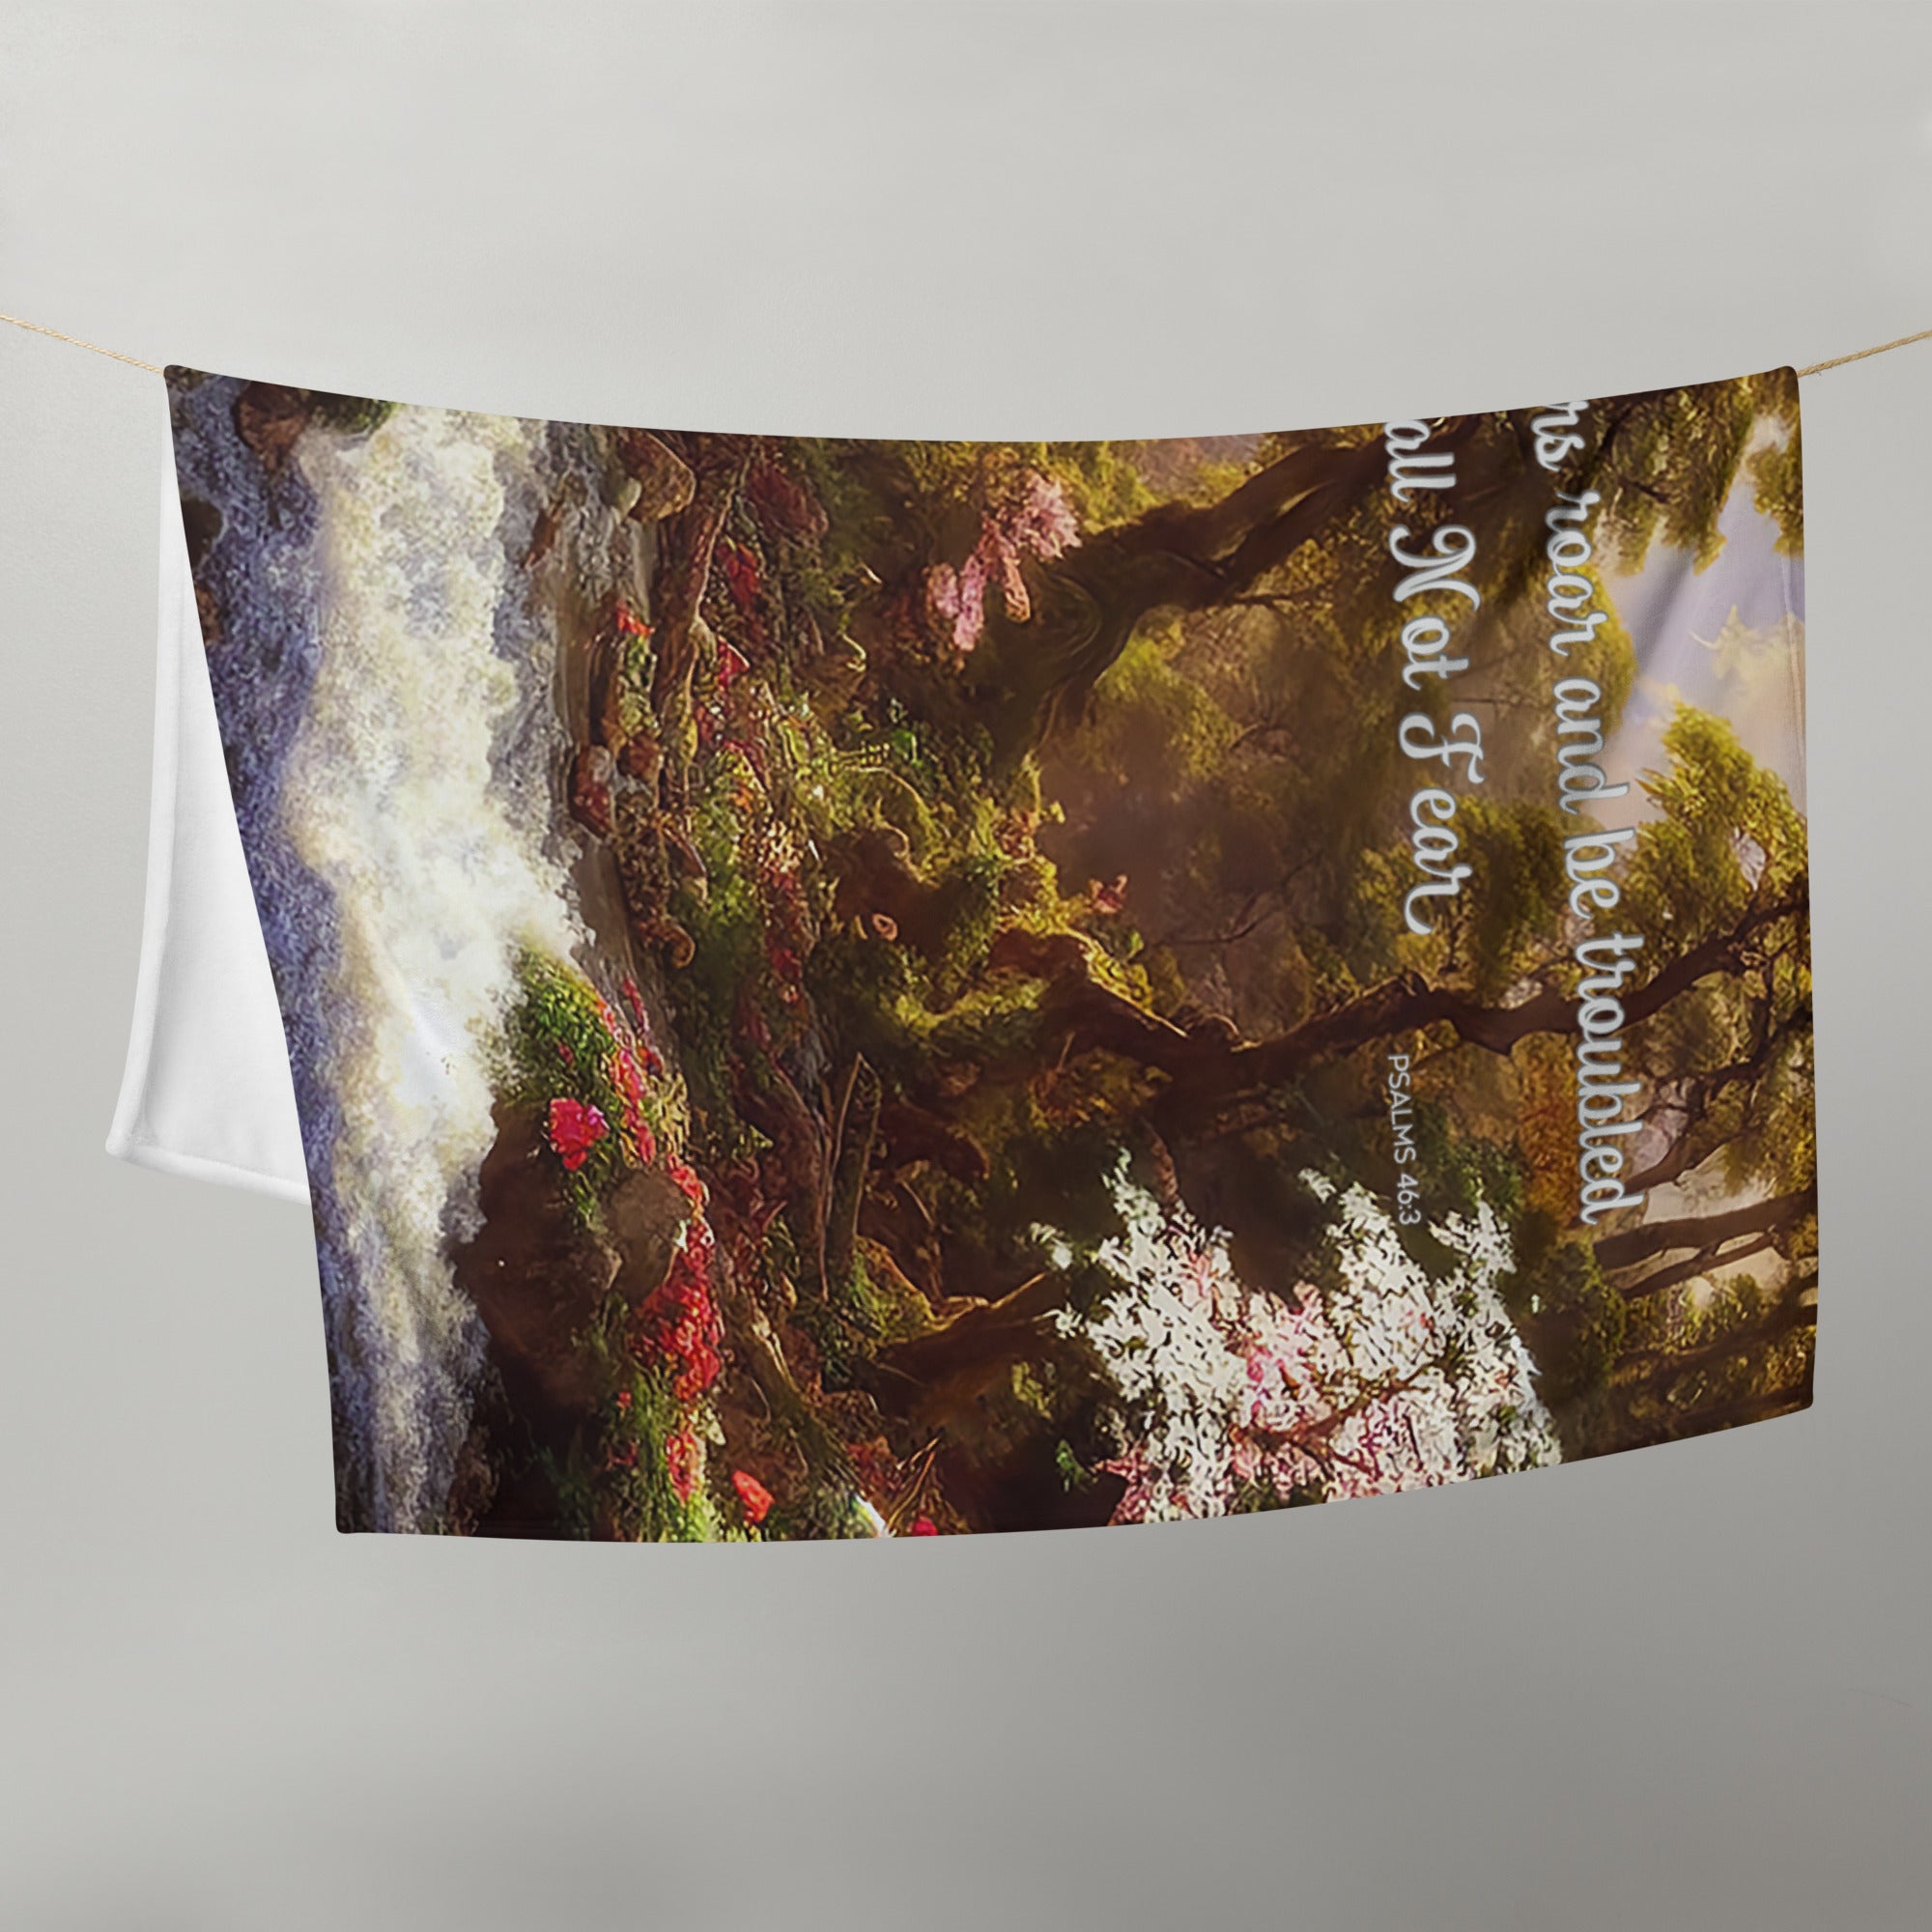 We Shall Not Fear Troubled Waters Throw Blanket - 2 Sizes Size: 50″×60″ Jesus Passion Apparel